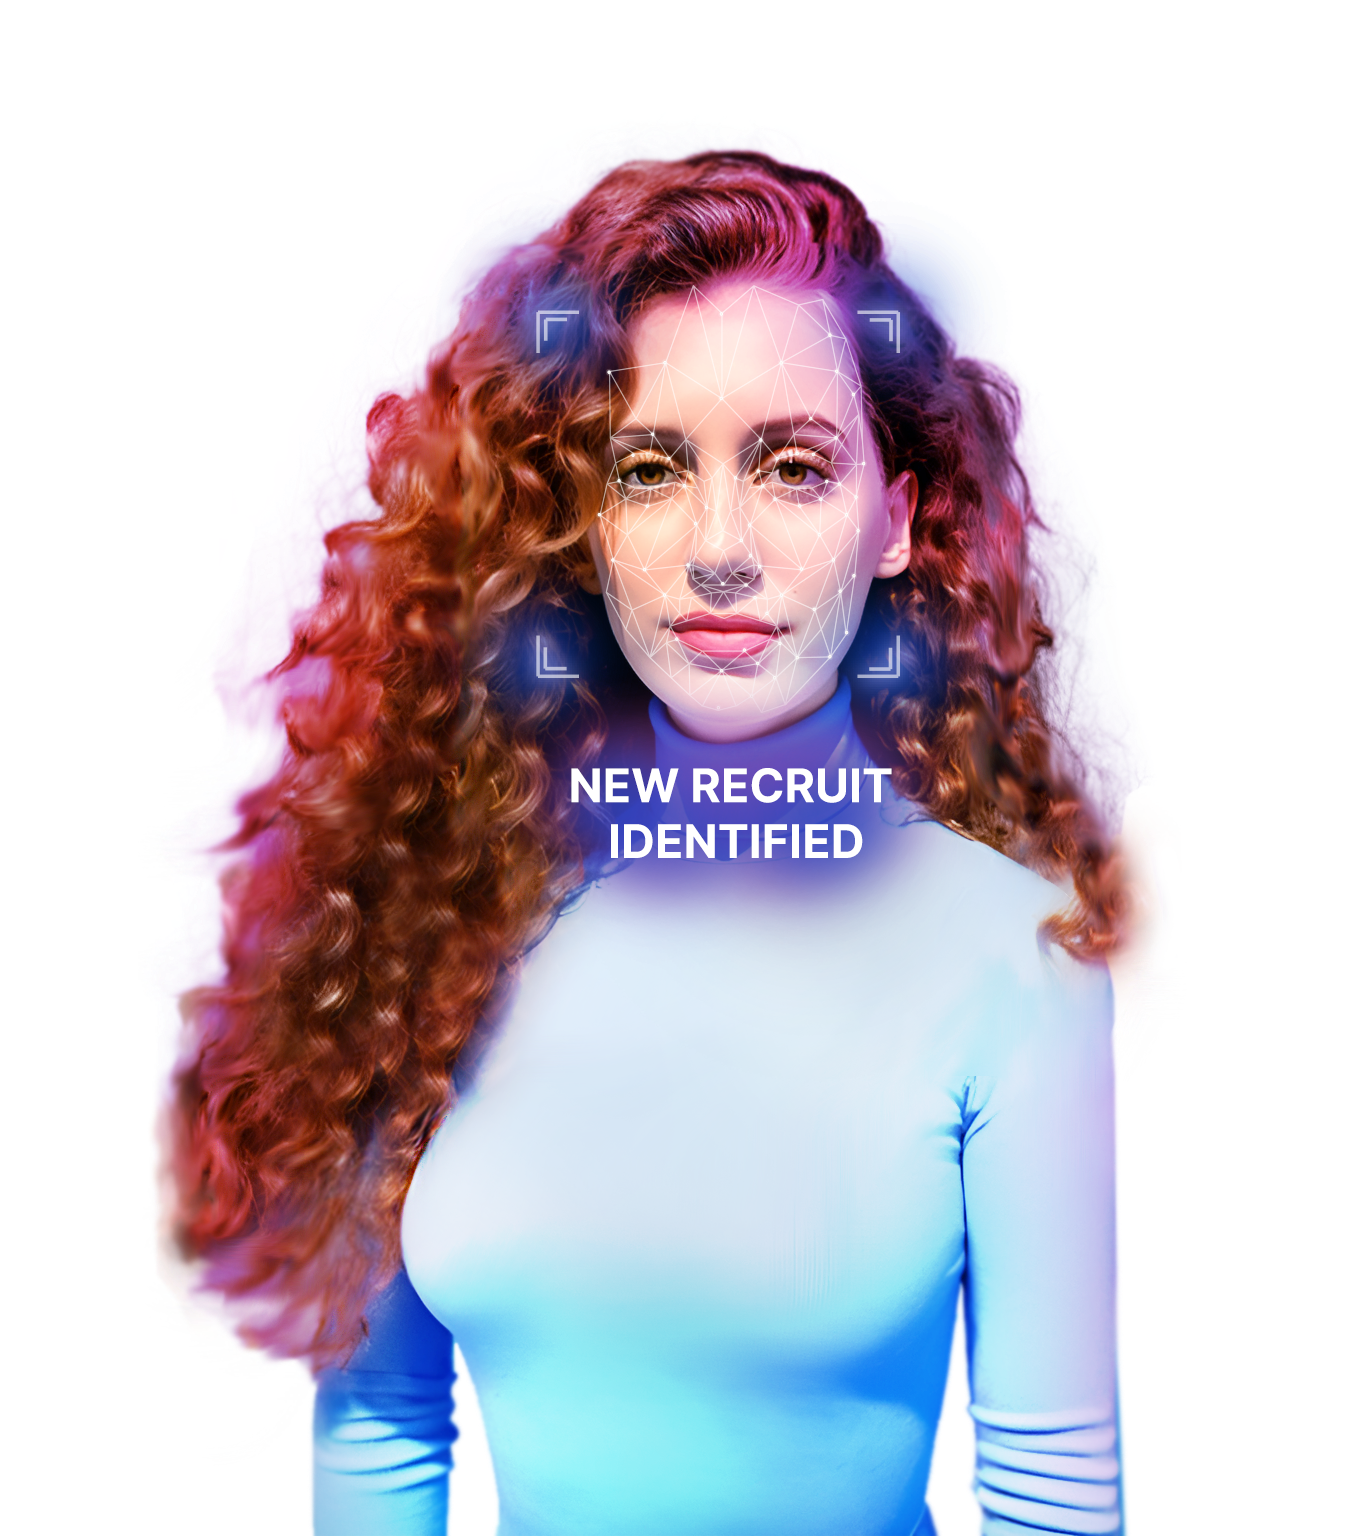 A digital art of Giovanna, she is white woman, with curly long ginger hair, wearing a light blue turtleneck. In front of her face appears a lines simulating a facial recognition screening, under it is written "new recruit identified"